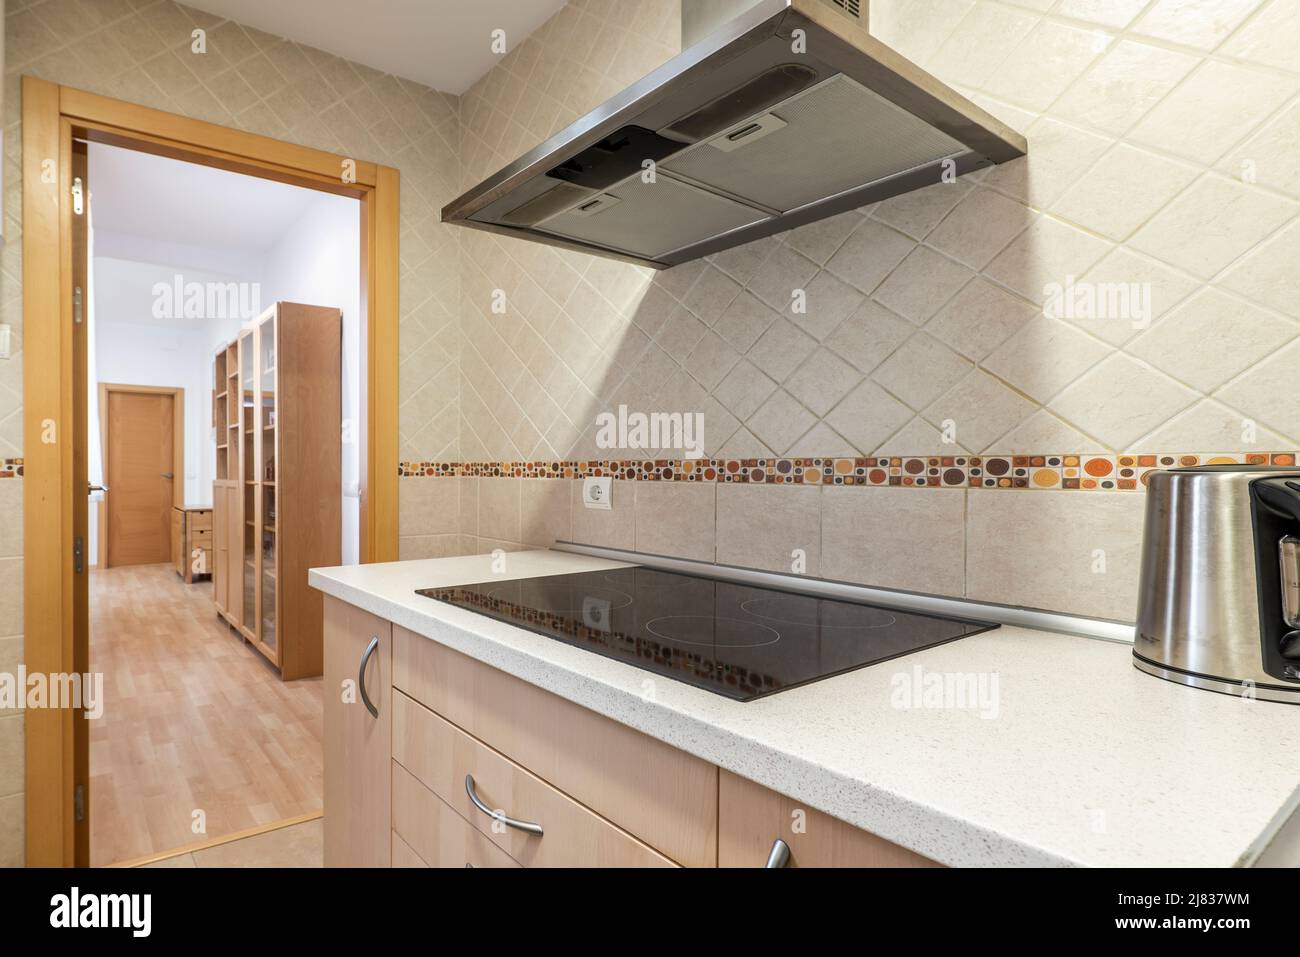 Kitchen with wood colored cabinets, rustic wall tiles and stainless steel range hood Stock Photo